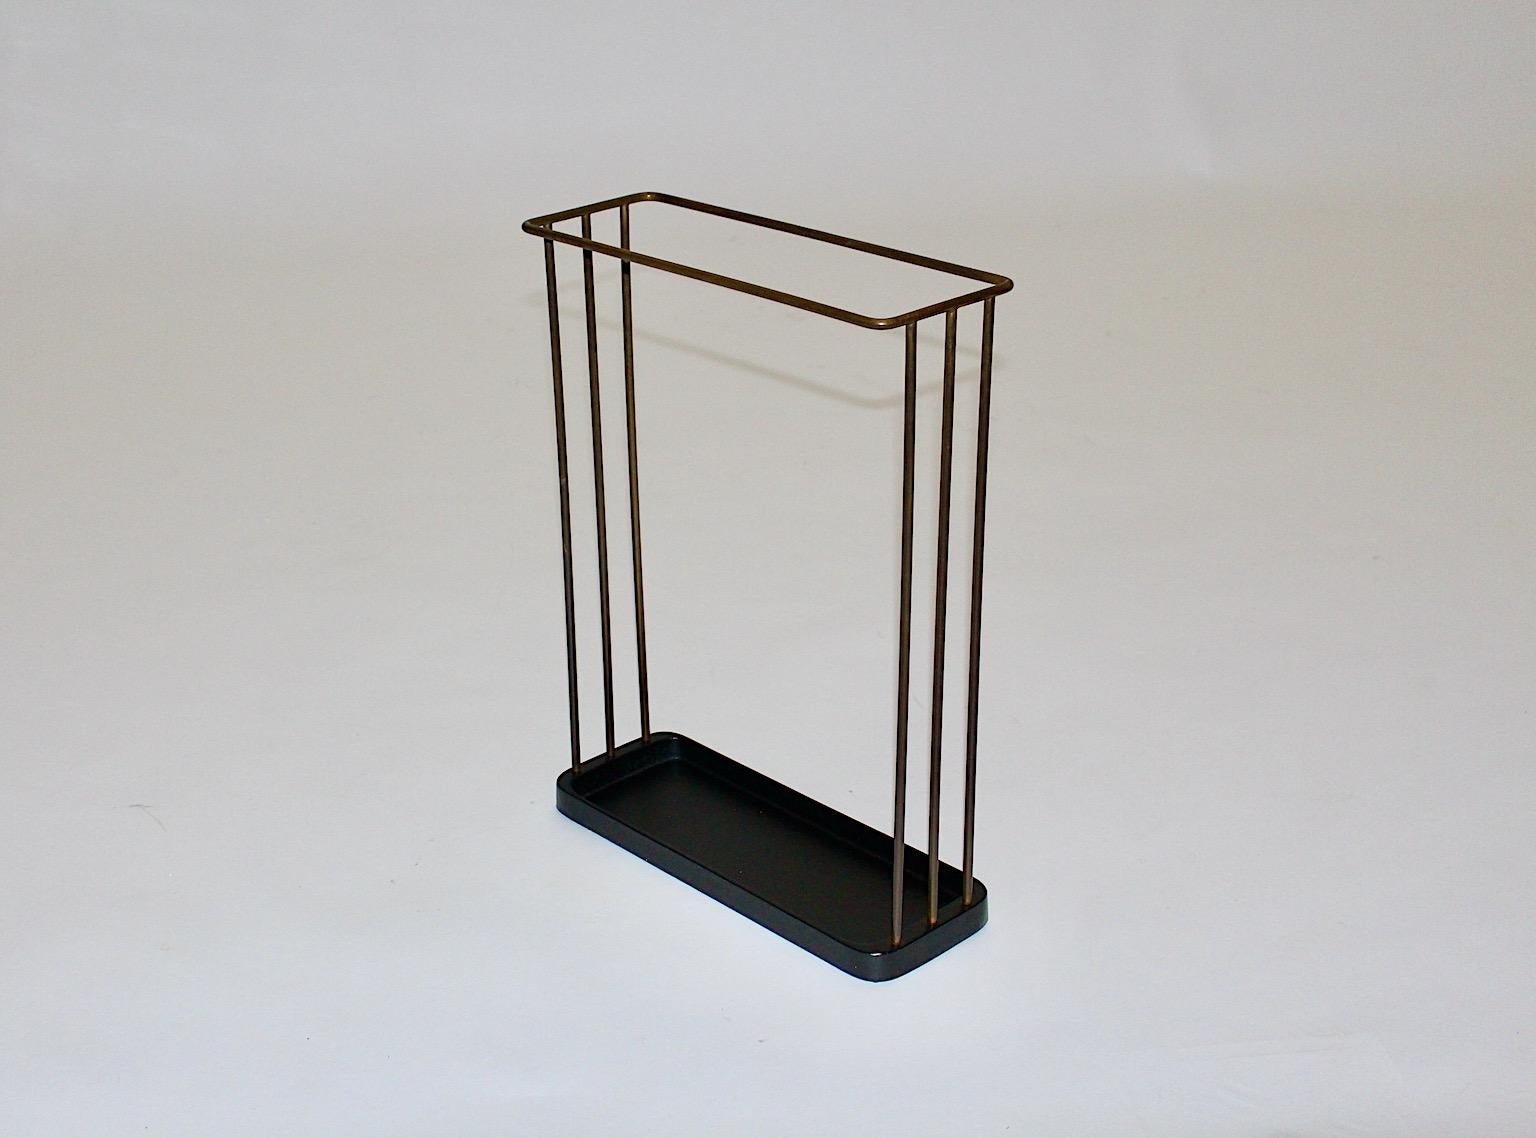 Mid-Century Modern vintage umbrella stand from black iron and brass by Franz Hagenauer for Workshop Hagenauer, 1950s, Austria.
Franz Hagenauer ( Vienna 1906 - 1986 )
A gorgeous umbrella stand from black cast iron with a solid brass